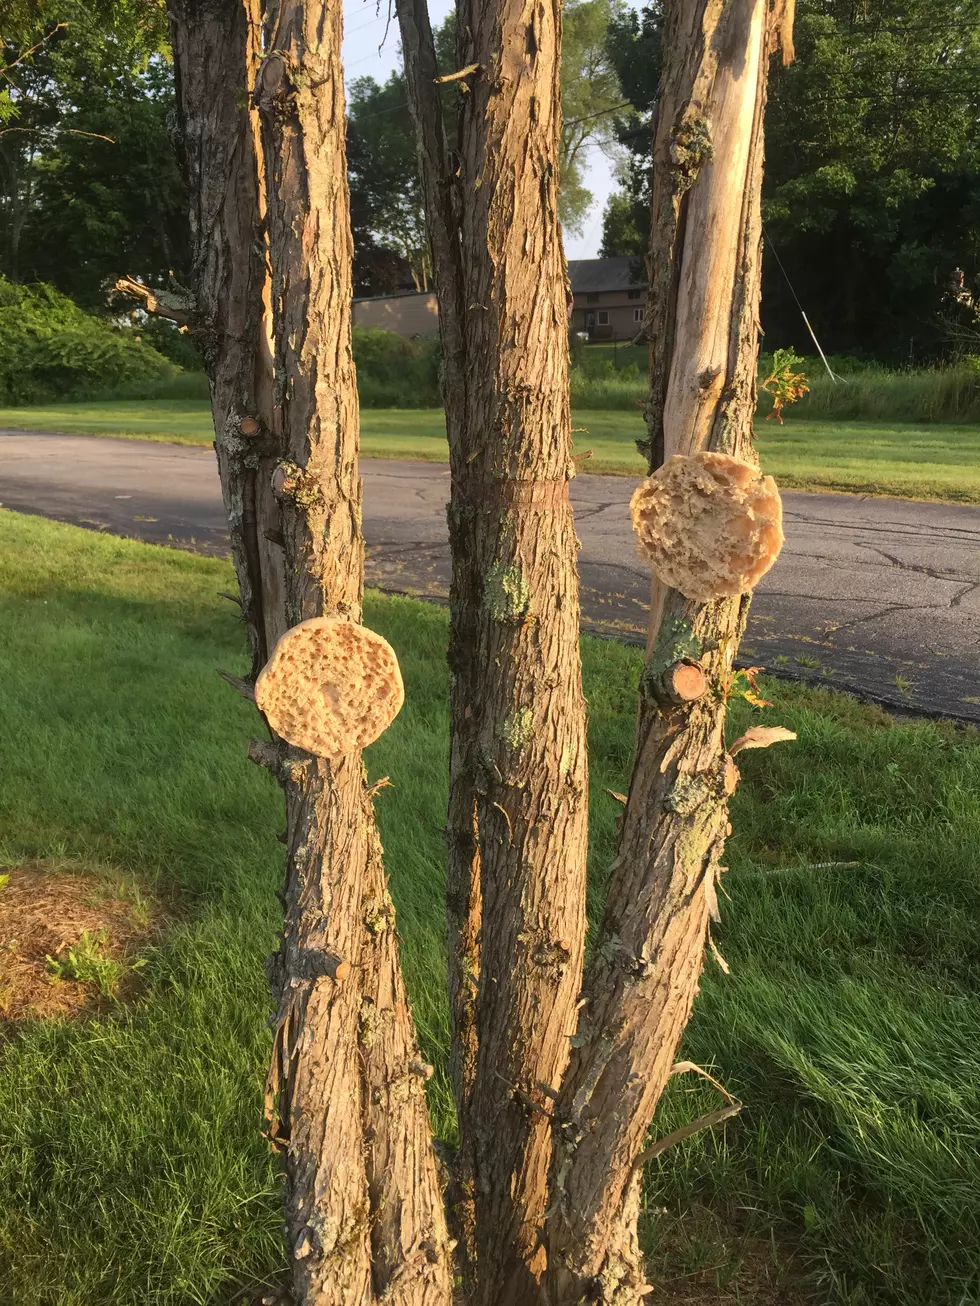 Weird Trend Of Stapling Bread To Trees Spotted in NH